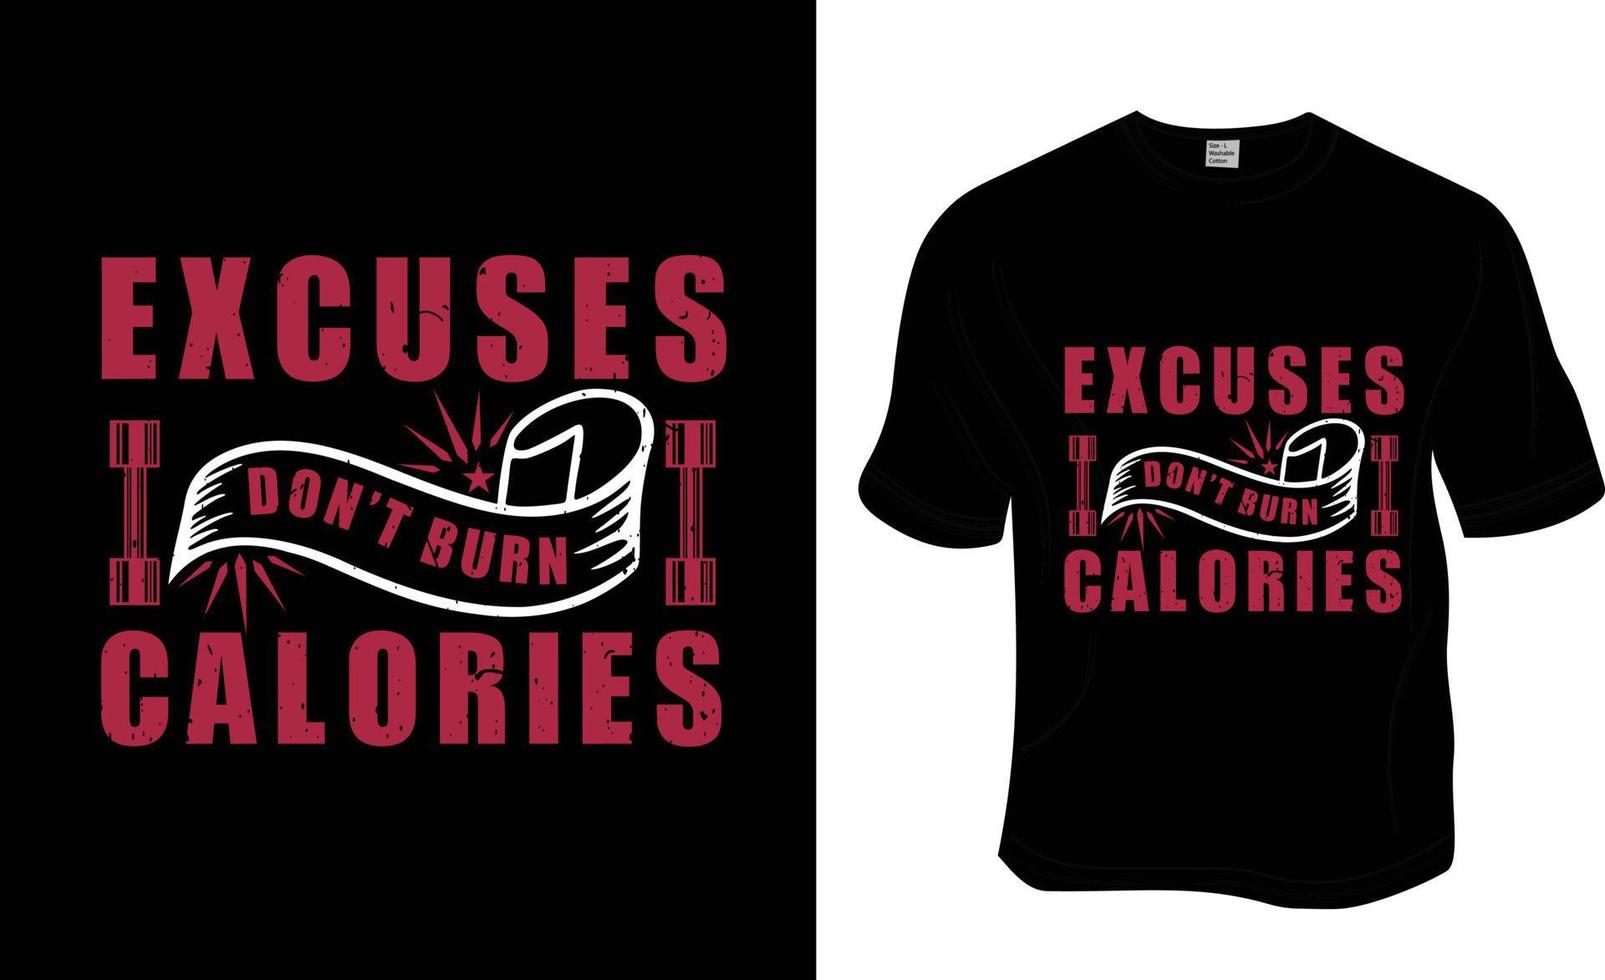 Excuses don't burn calories, SVG, Gym workout t-shirt design. Ready to print for apparel, poster, and illustration. Modern, simple, lettering. vector